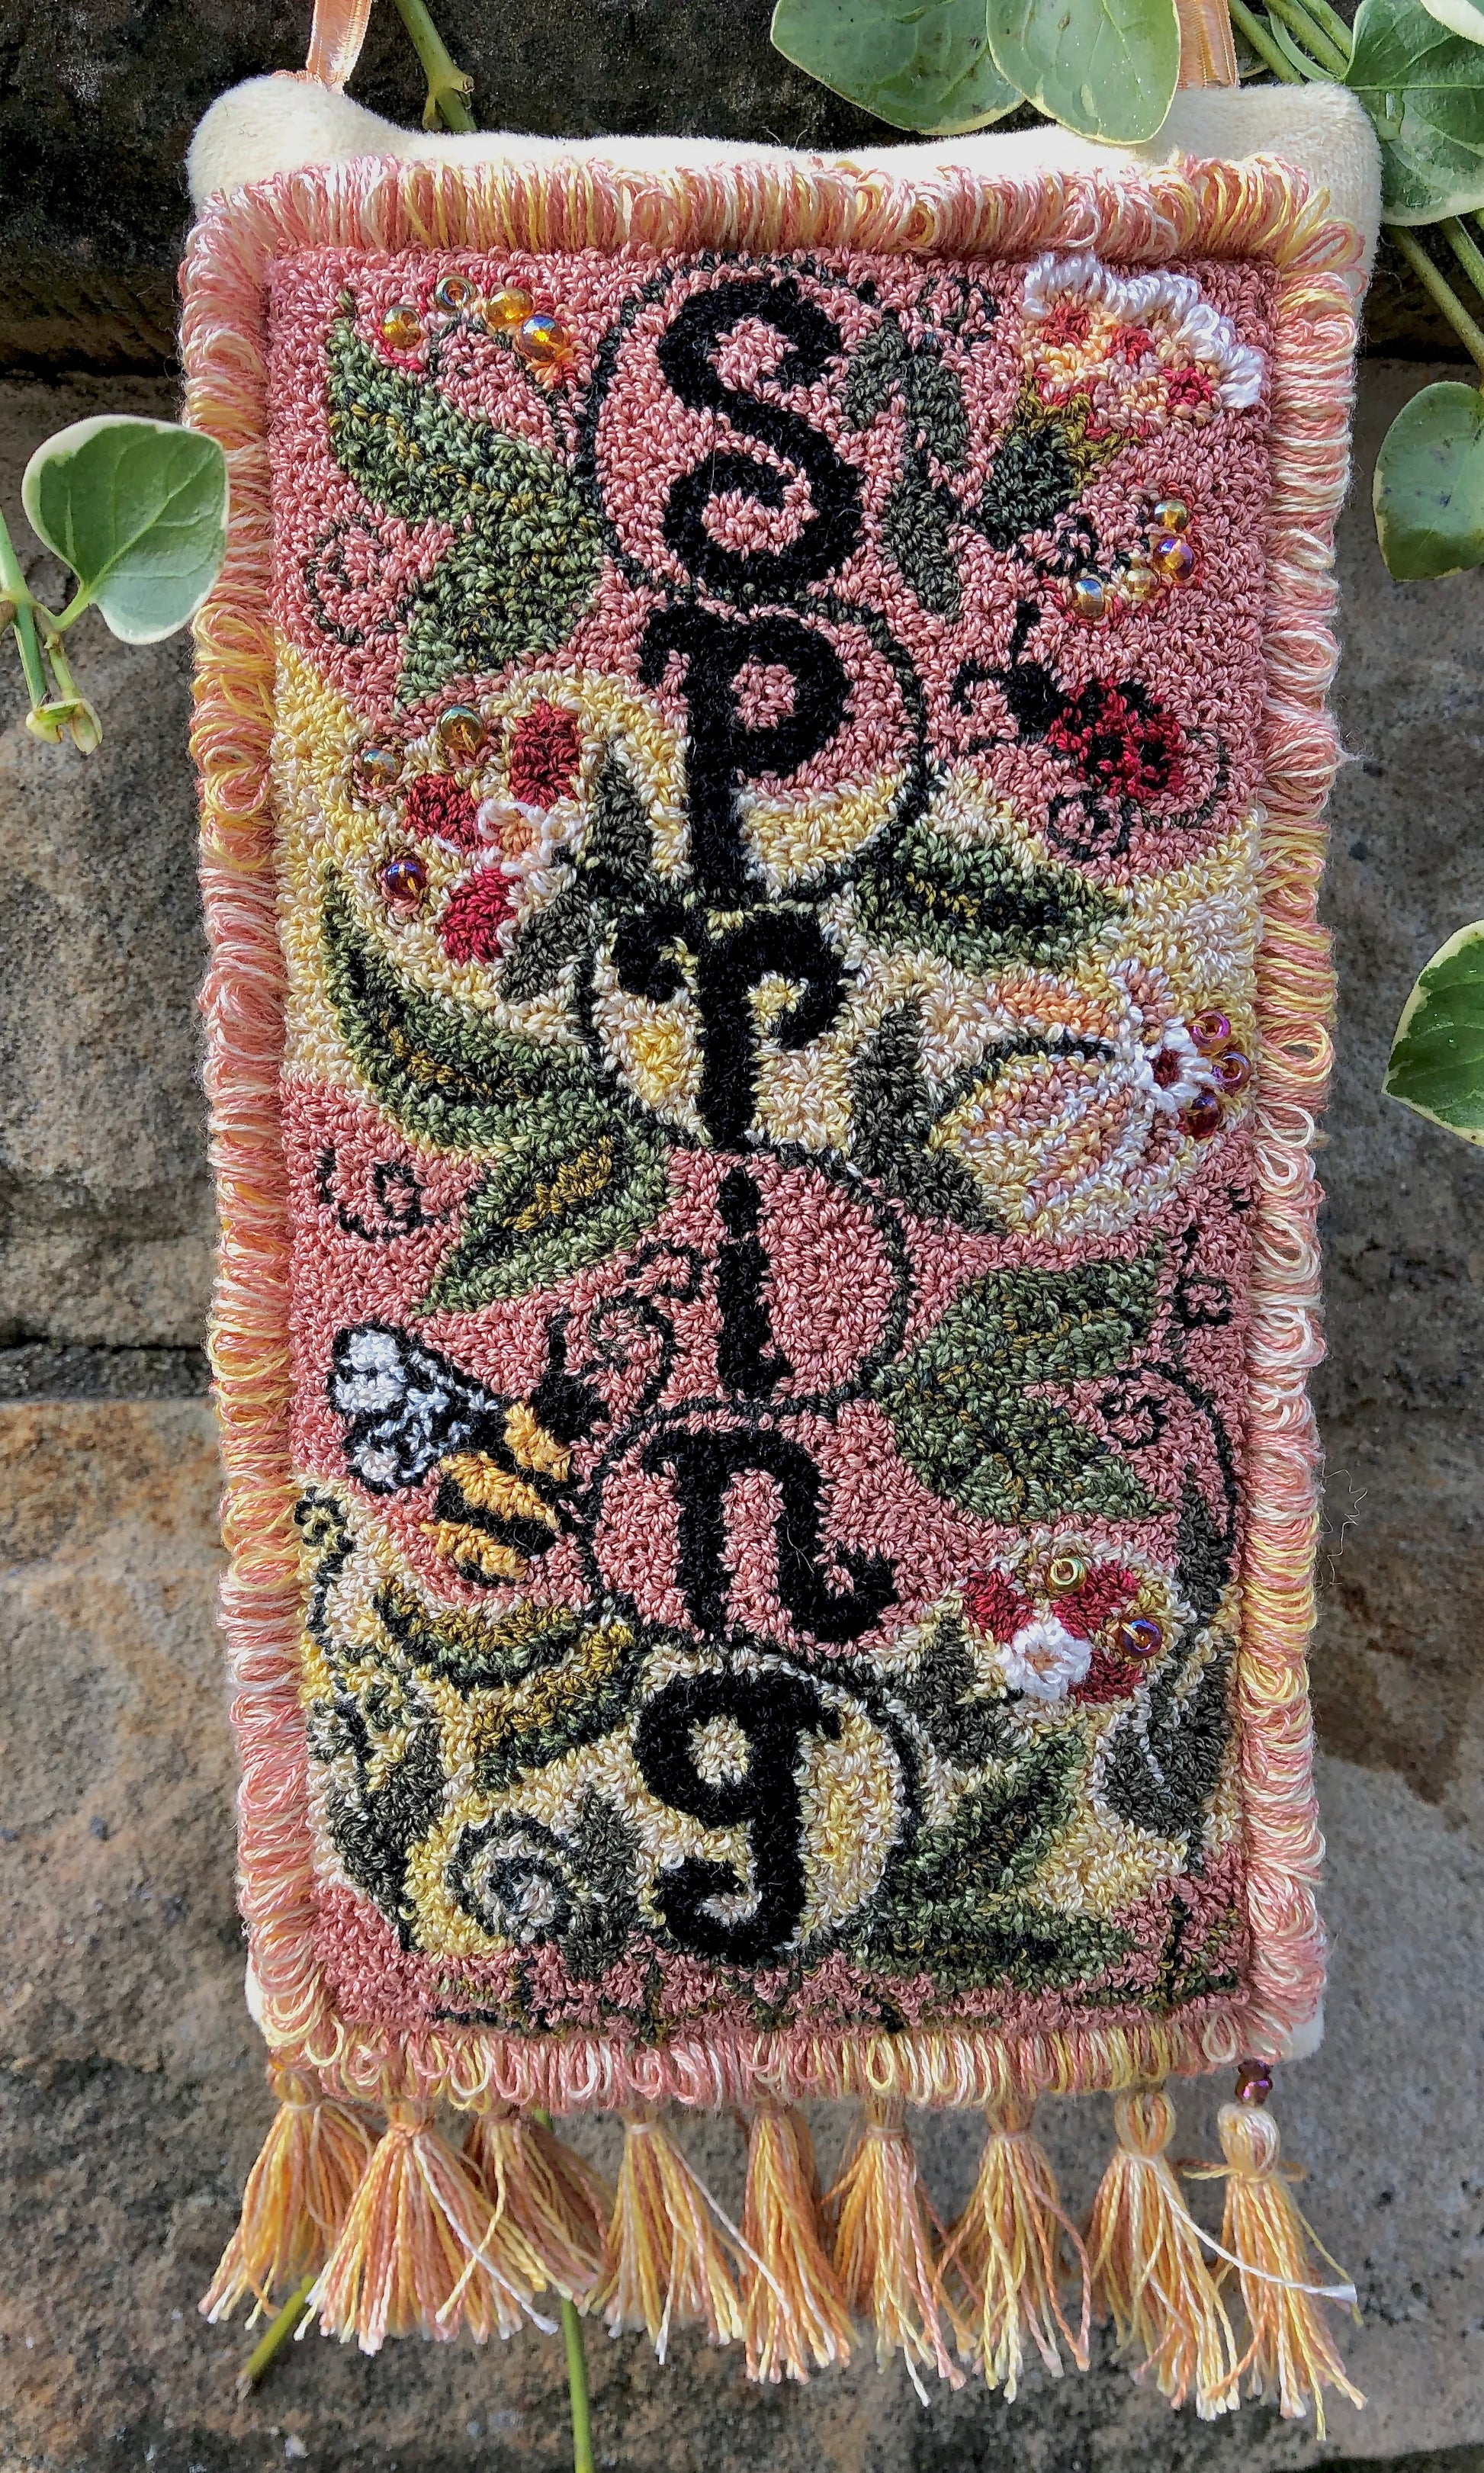 Spring Vine- PDF punch needle pattern digital download by Orphaned Wool. This lovely Spring Vine has a sweet bumblebee and ladybug and flowers all in the pattern. Copyright 2020 Kelly Kanyok , Orphaned Wool. Enjoy creating this beautiful Spring Vine design.